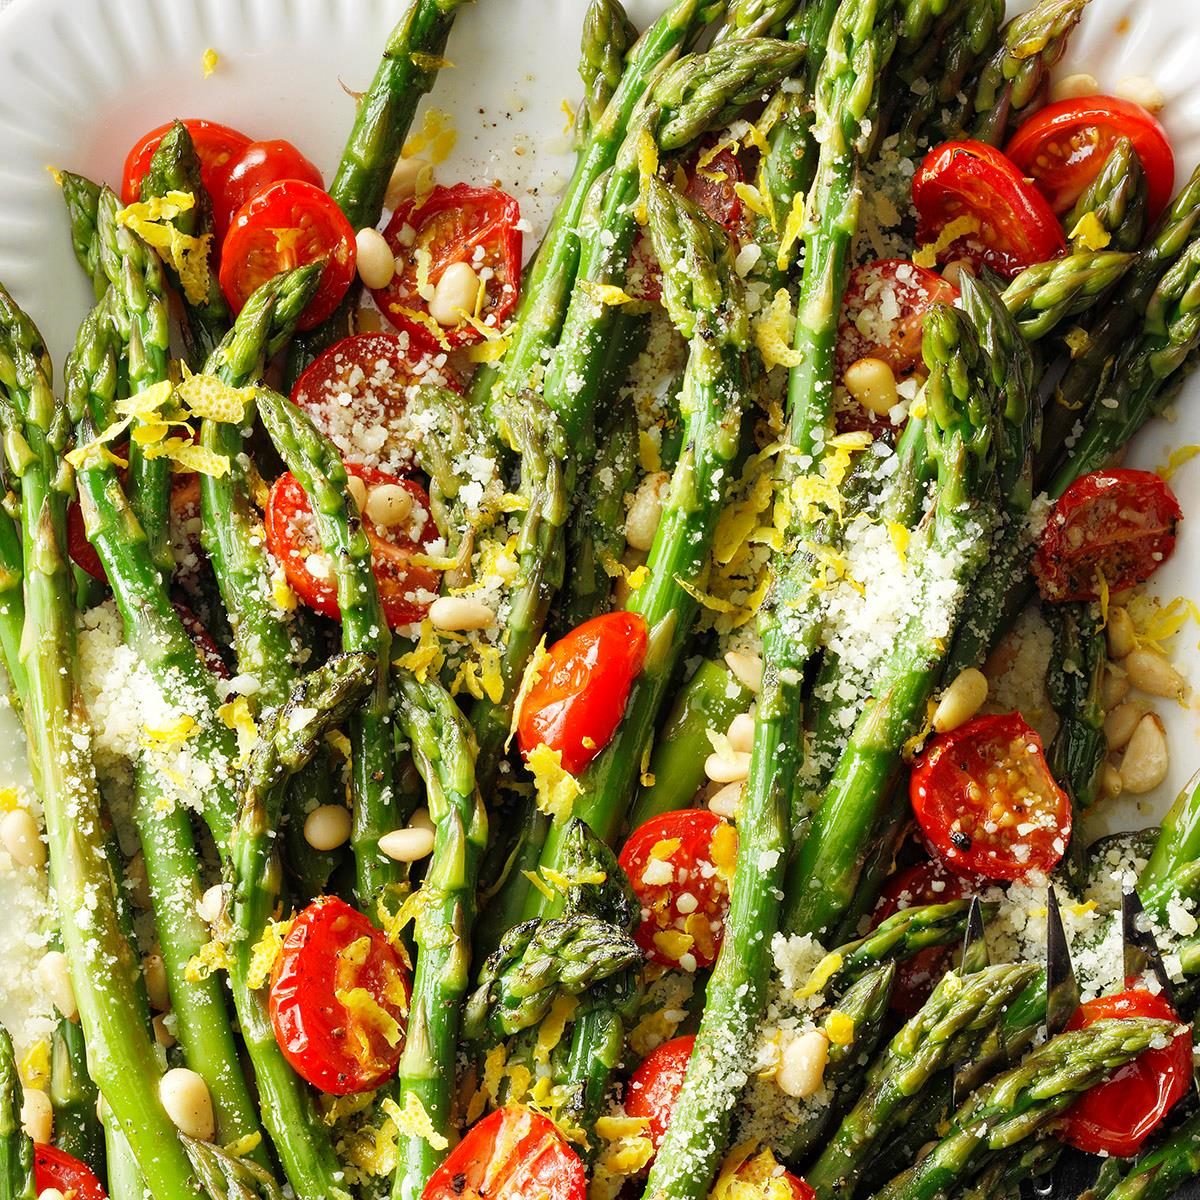 Tuscan Style Roasted Asparagus Exps Tohfec22 87487 Md 03 23 4b